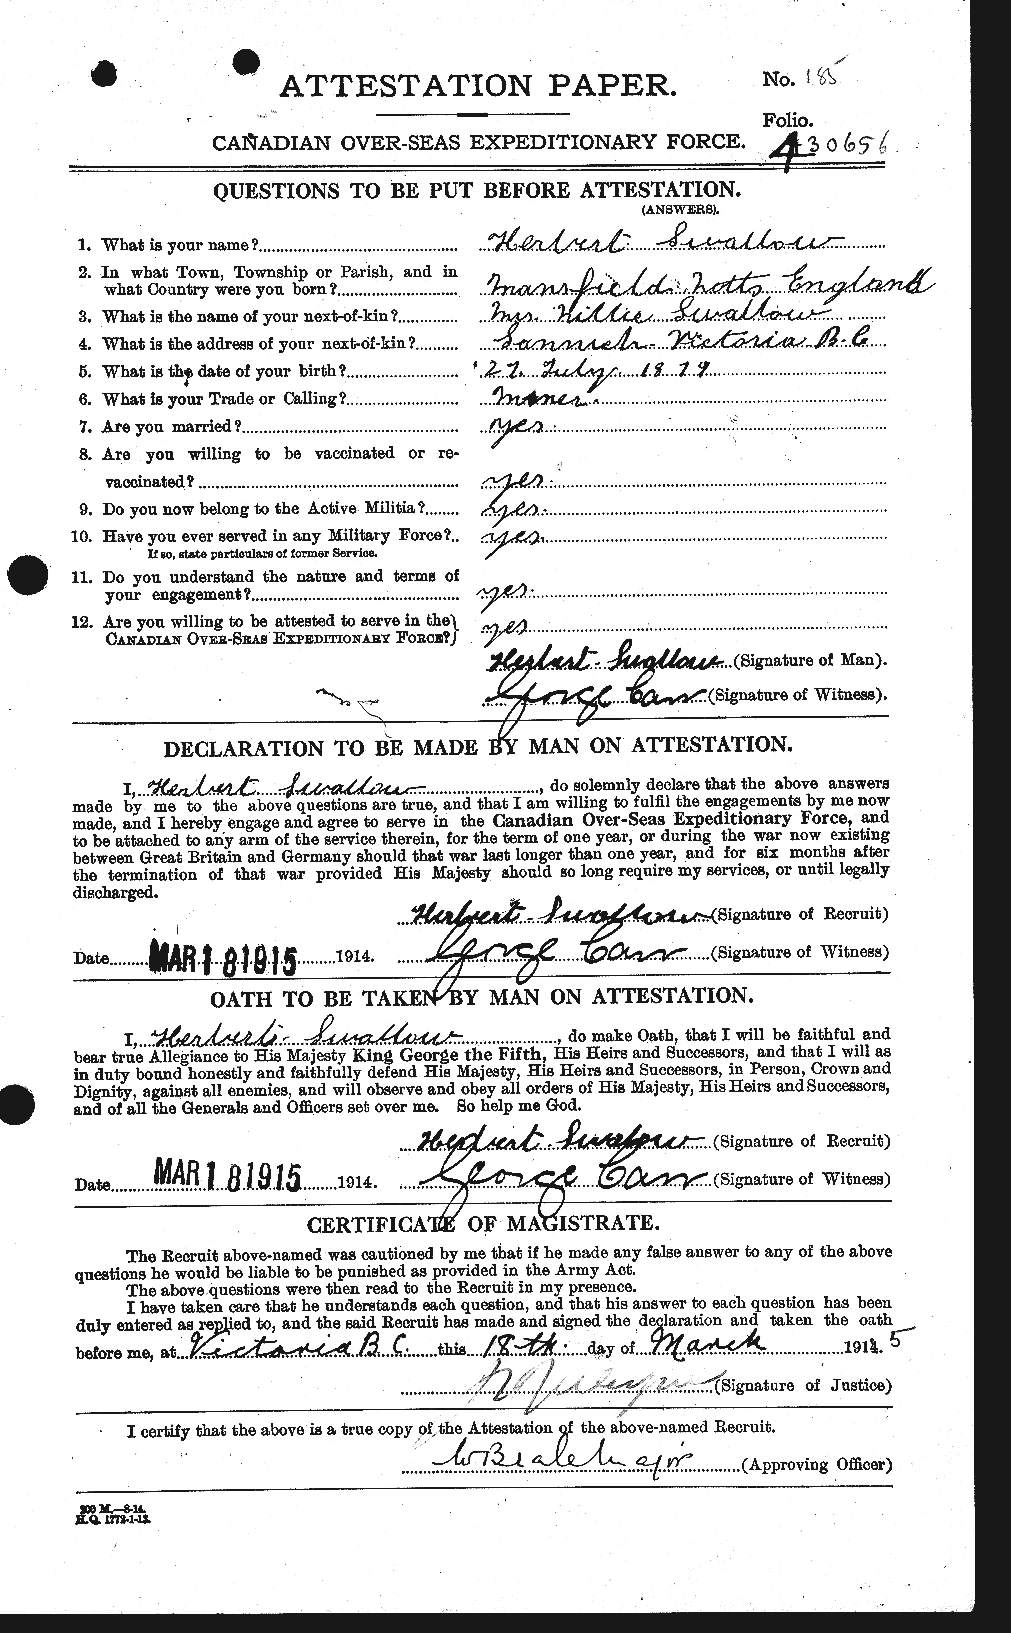 Personnel Records of the First World War - CEF 086495a